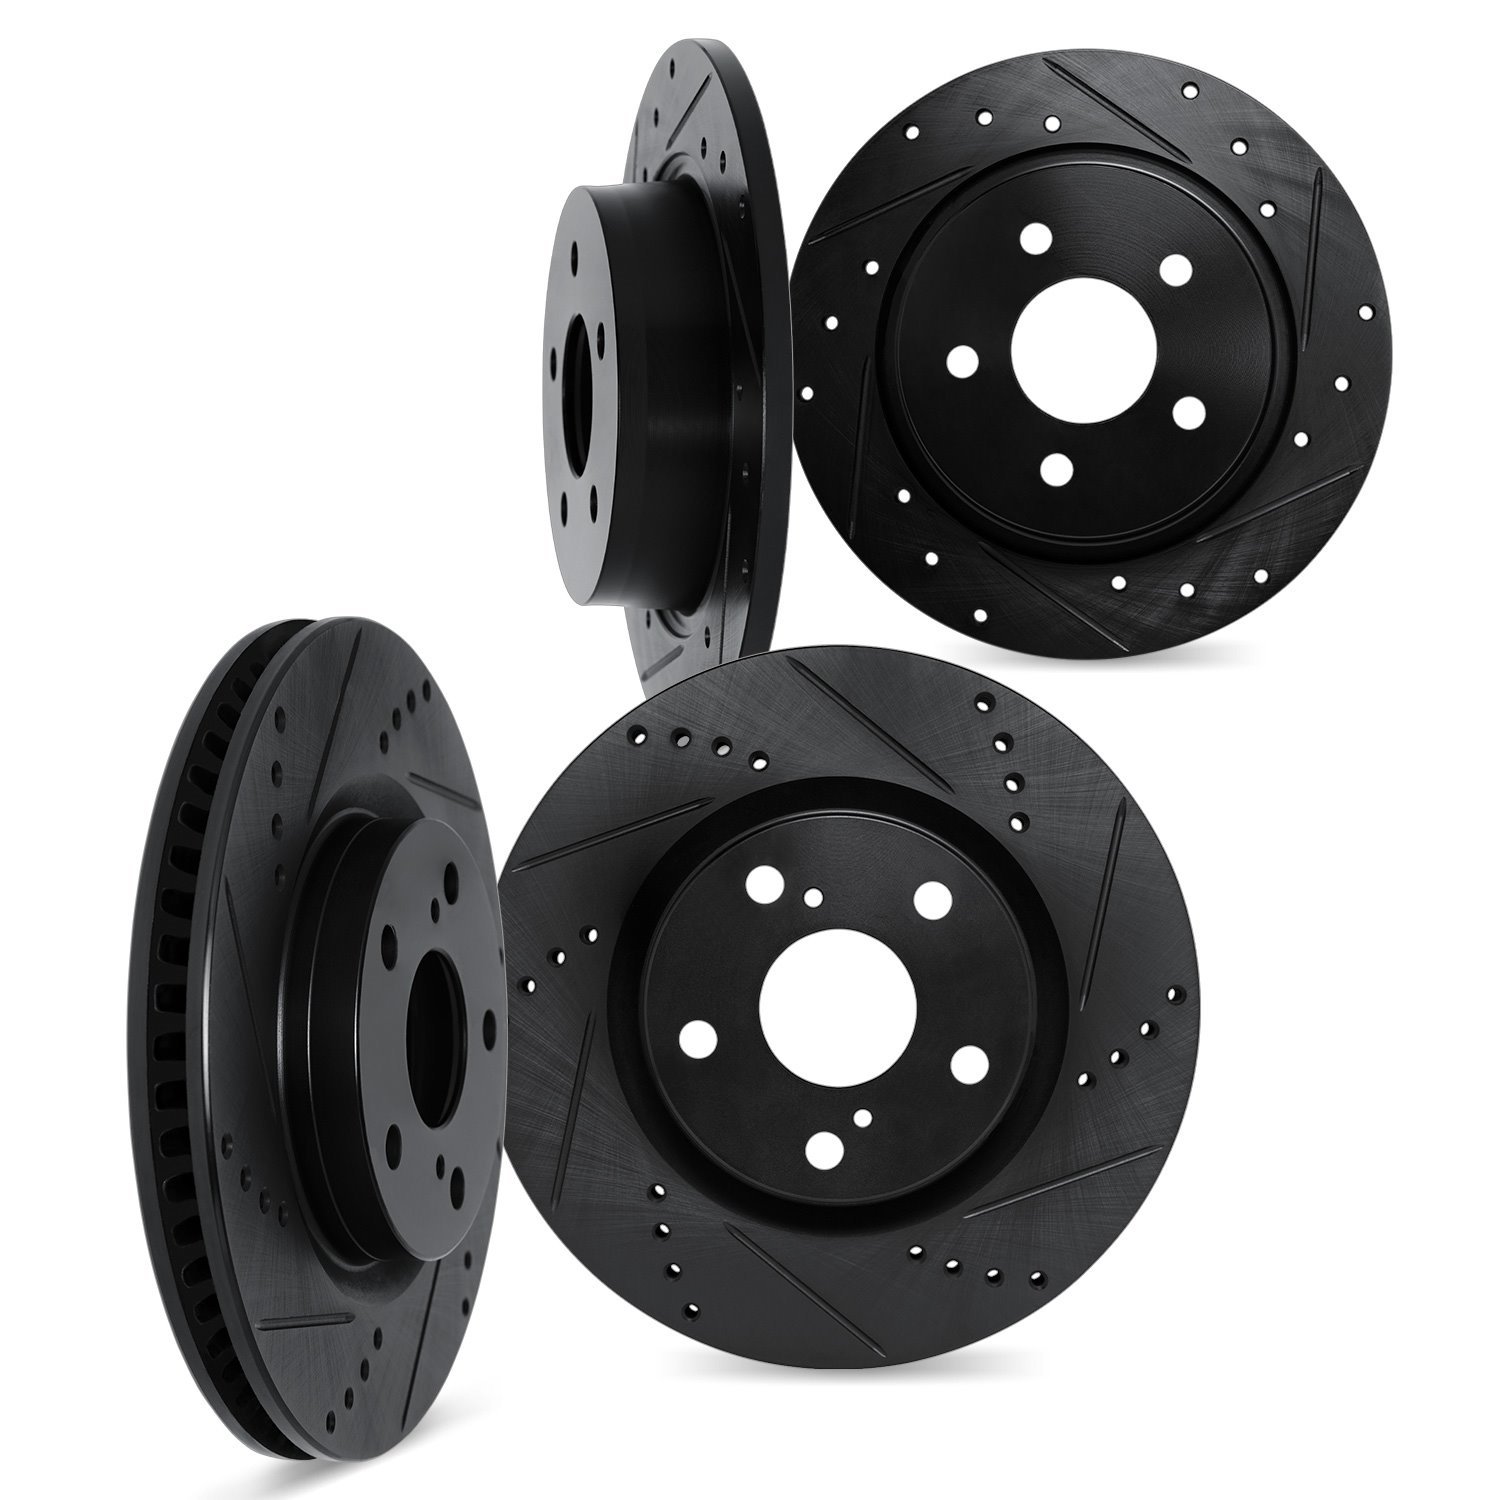 8004-76085 Drilled/Slotted Brake Rotors [Black], Fits Select Lexus/Toyota/Scion, Position: Front and Rear